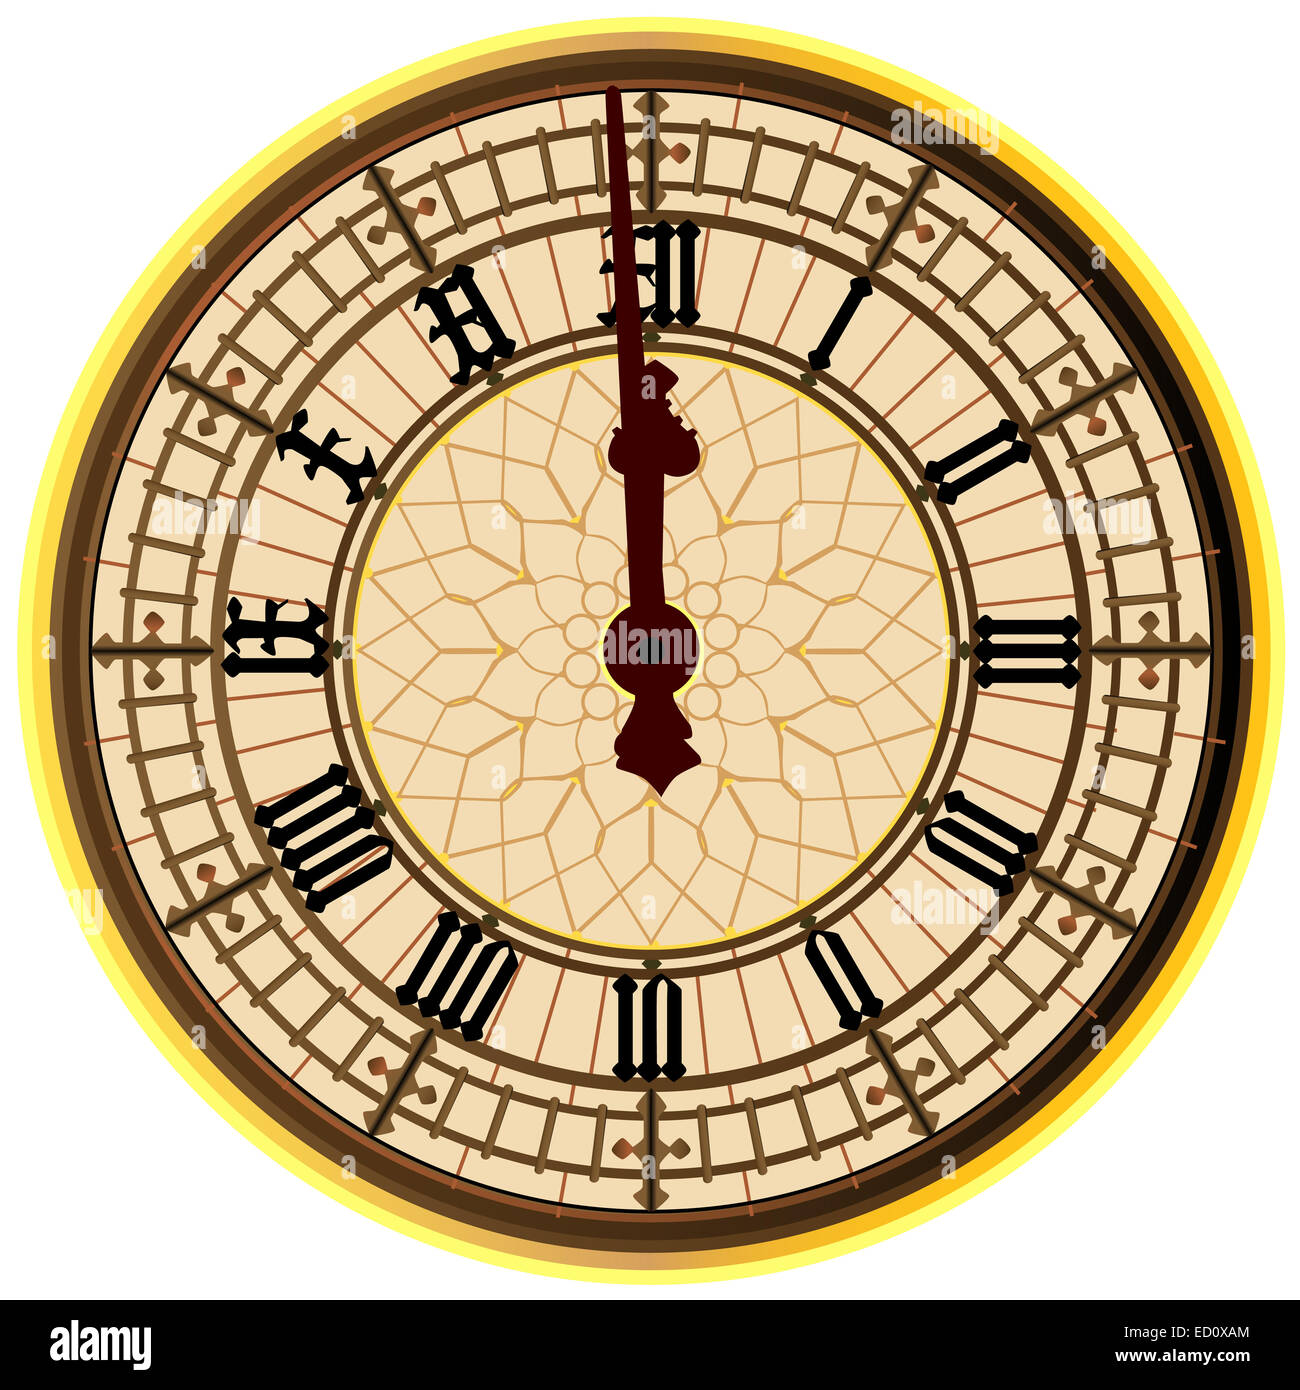 The clock face of the London icon Big Ben showing 12 o clock Stock